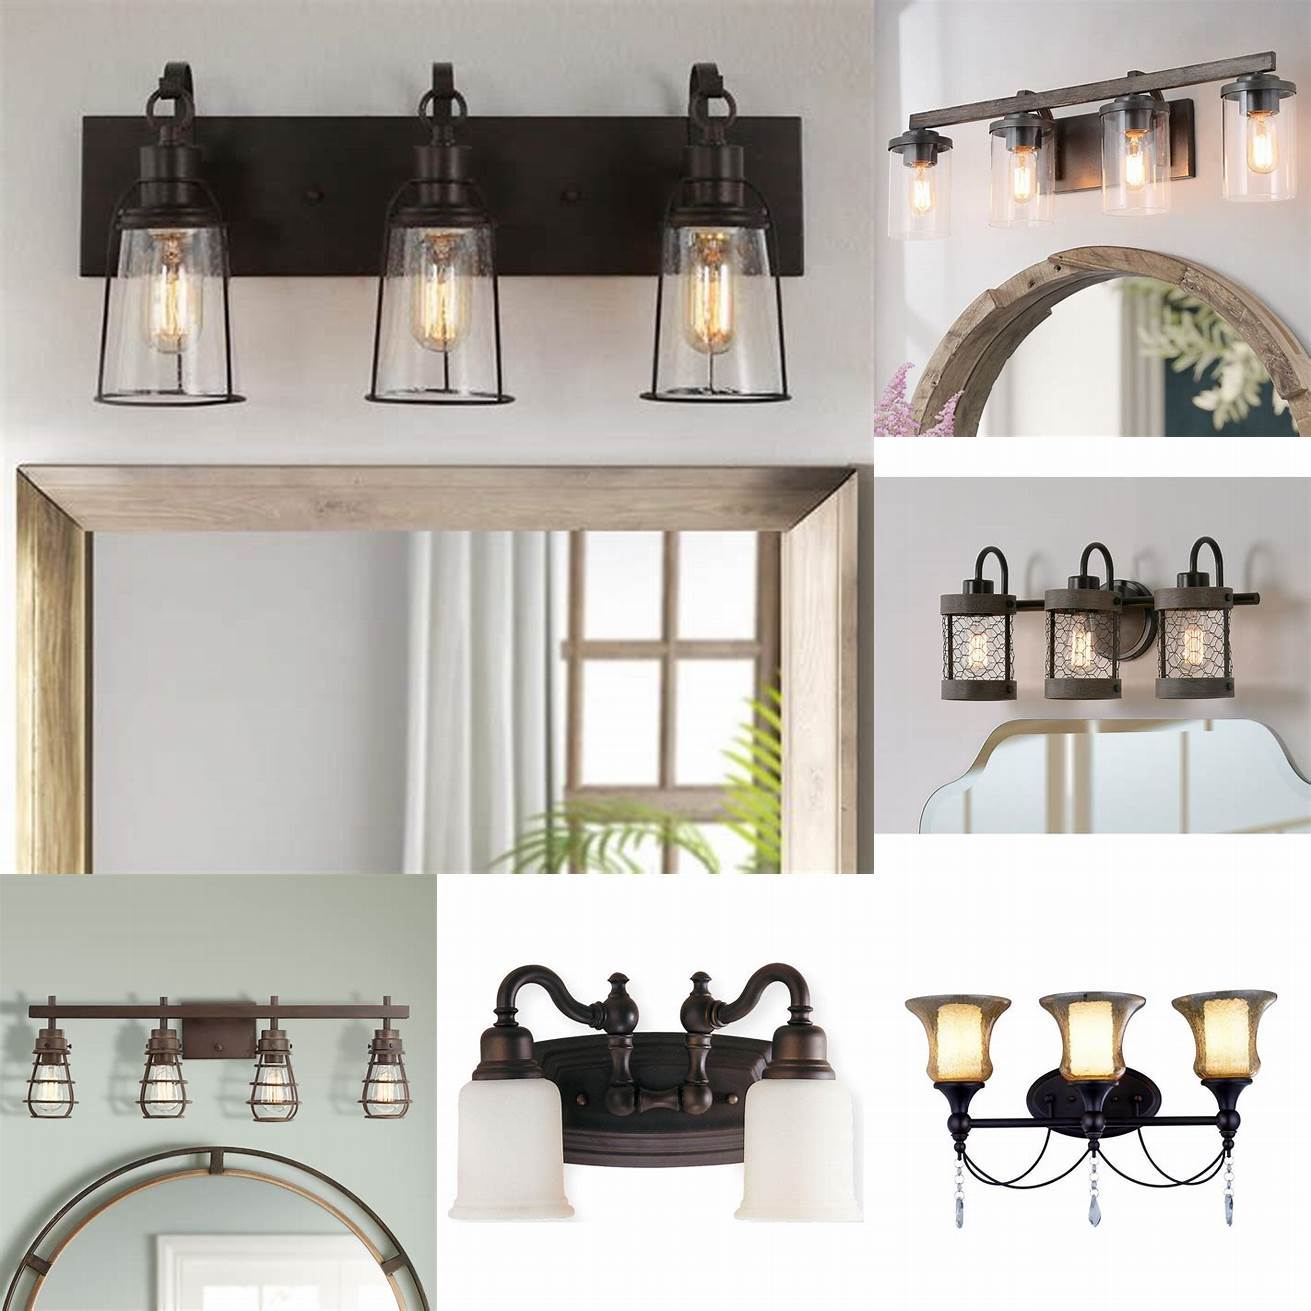 This rustic oil rubbed bronze vanity light features a wood accent and seeded glass shades